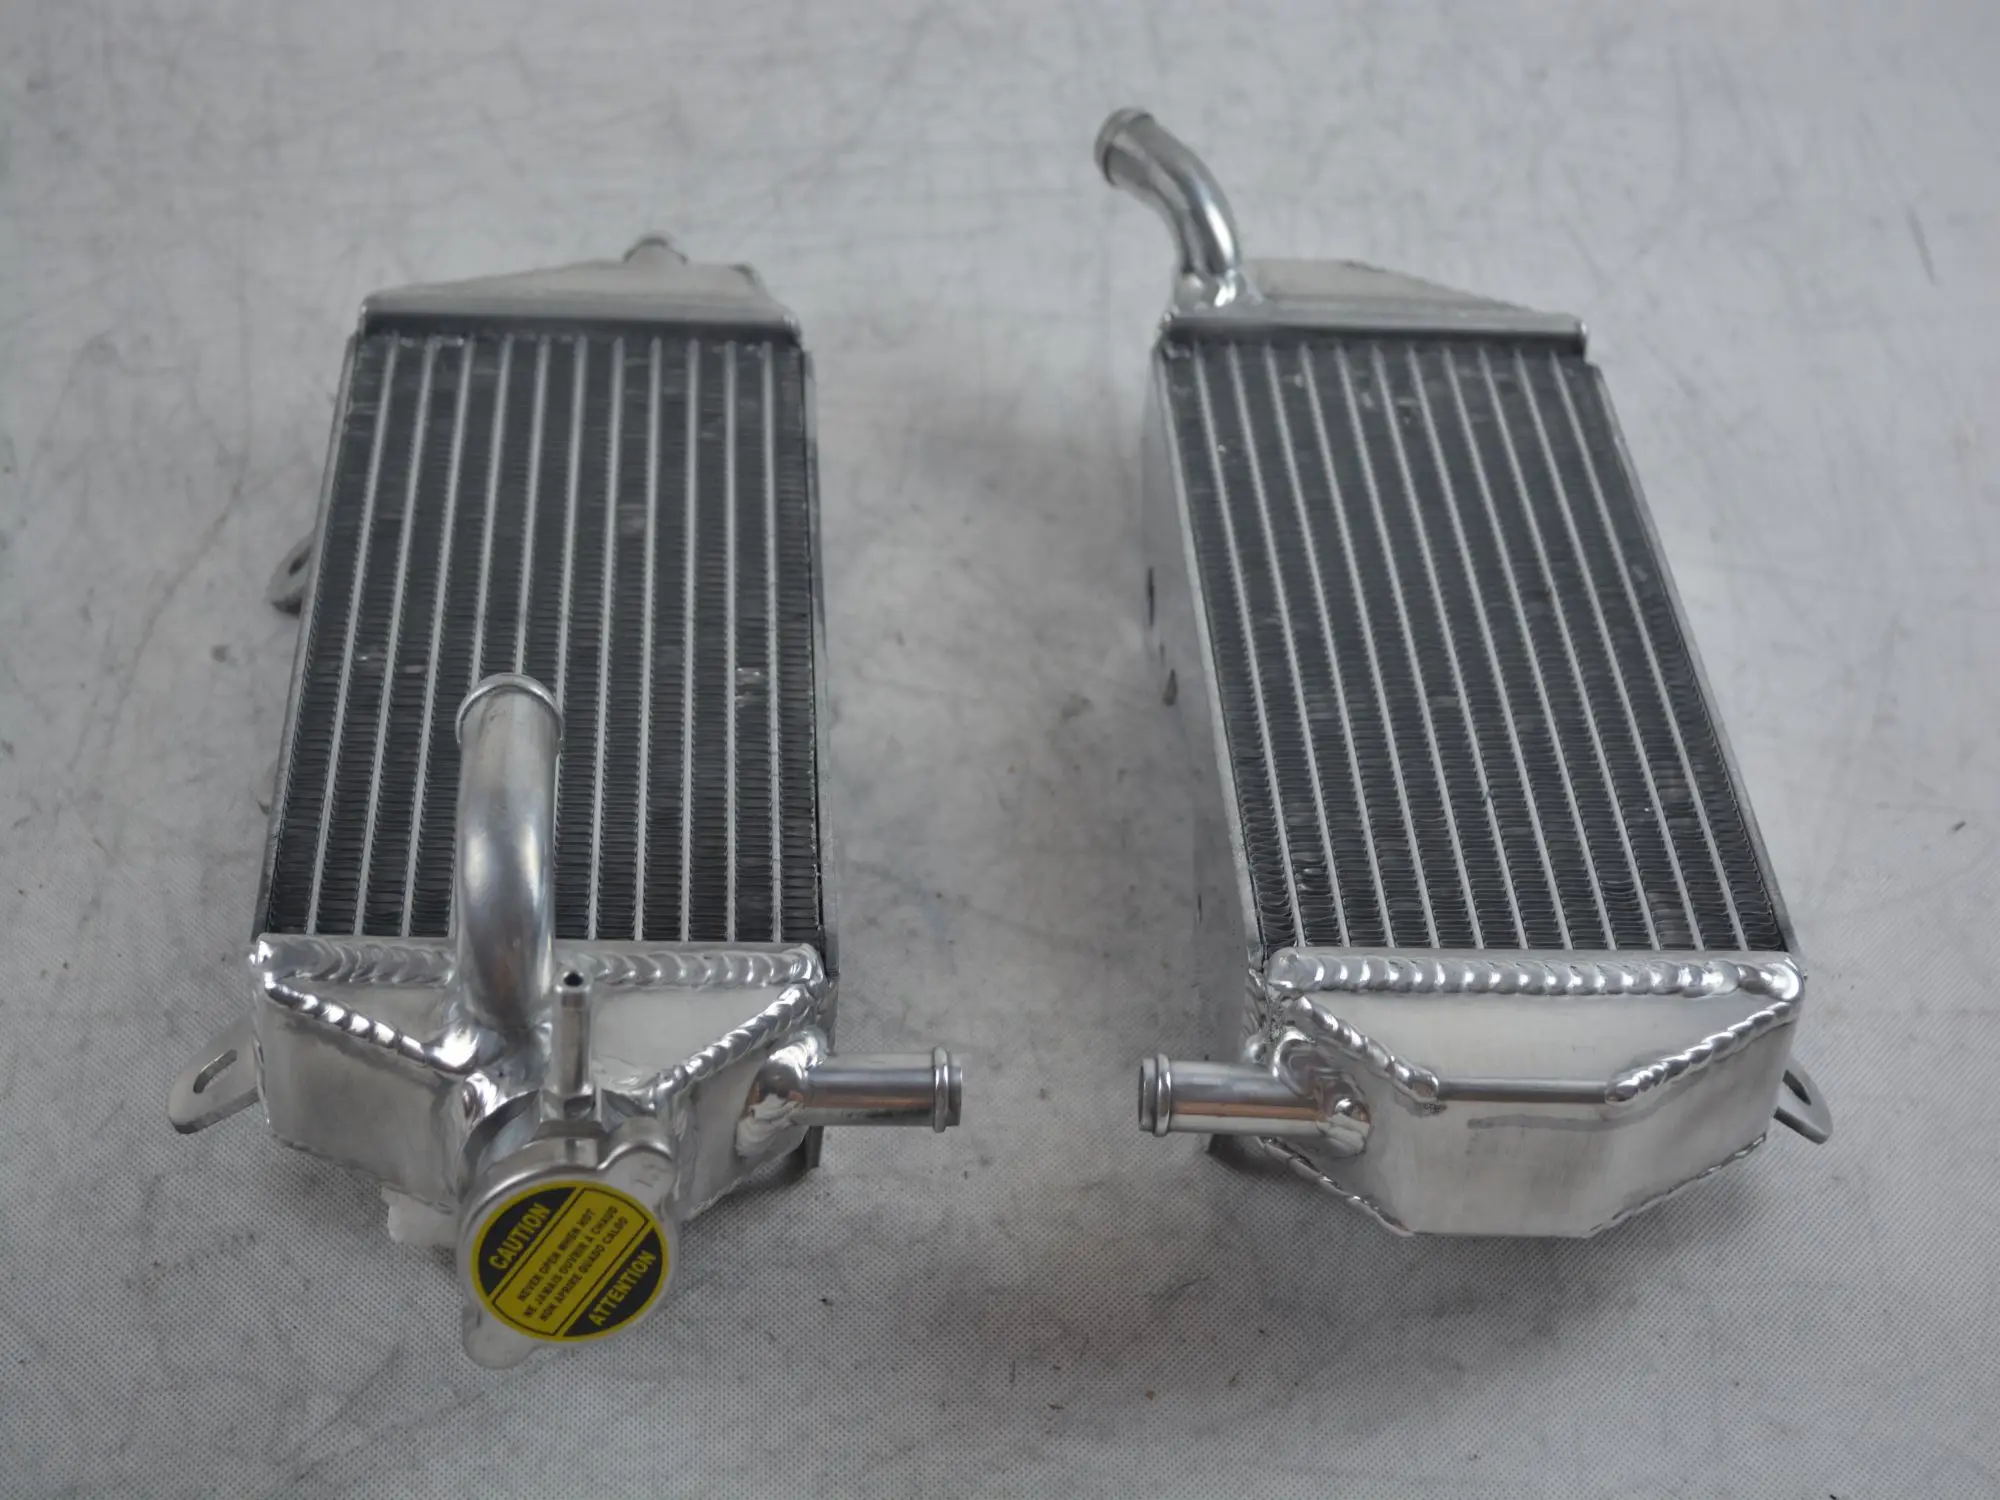 

New Left & Right side For 2010-2013 Yamaha YZ450F YZ 450 F Aluminum Radiator Cooler Cooling Coolant 2010 2011 2012 2013